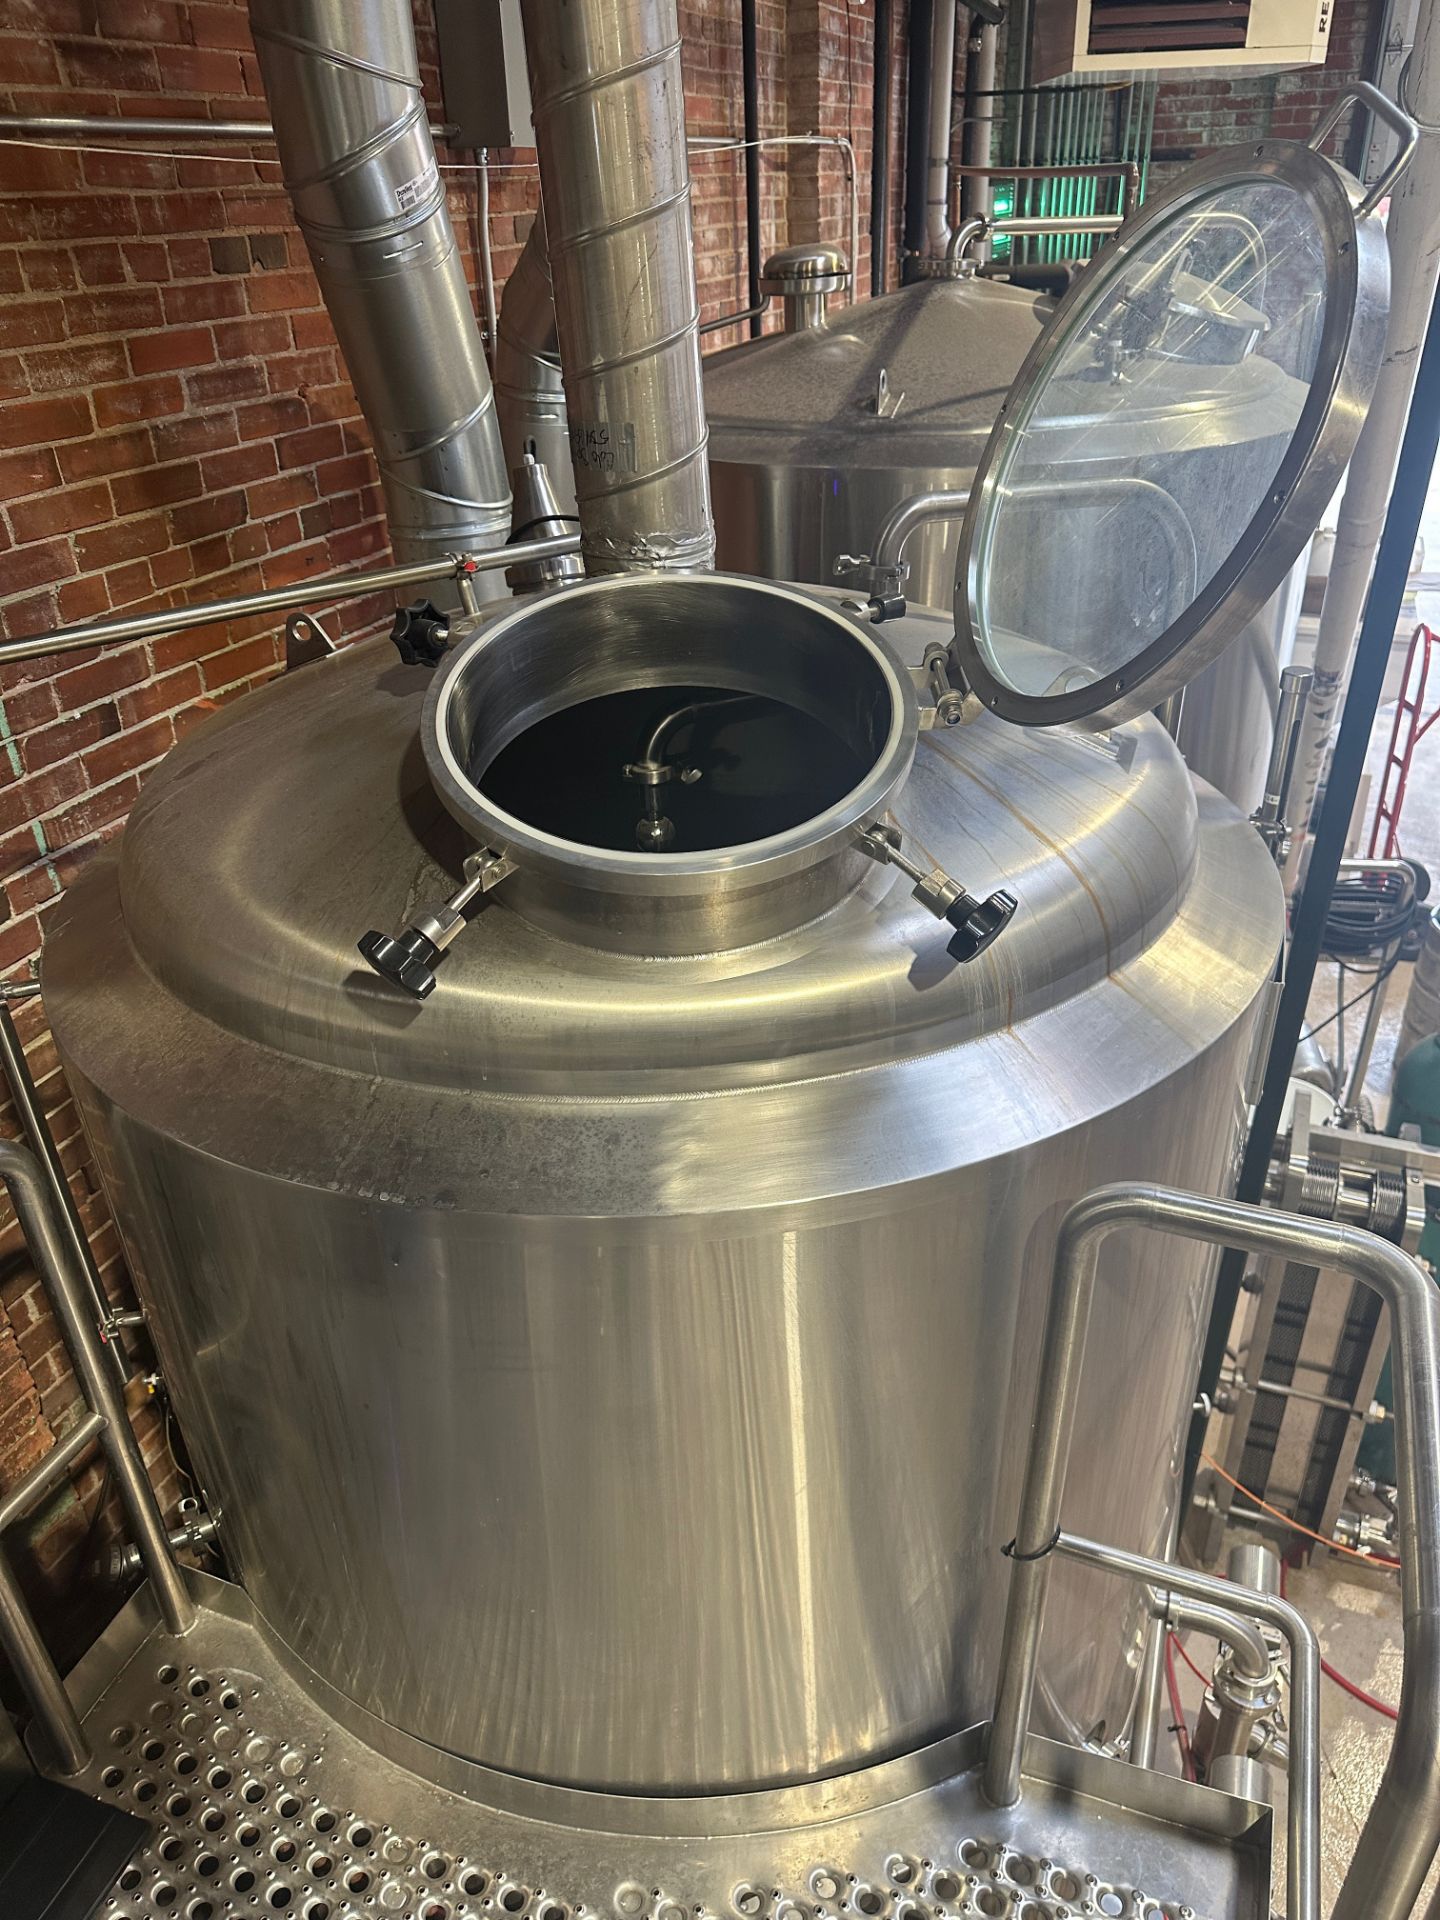 2019 ABS 10 BBL 2-Vessel Brewhouse with Grist Case - Mash/Lauter Tun (Approx. 5' Di | Rig Fee $4500 - Image 10 of 24